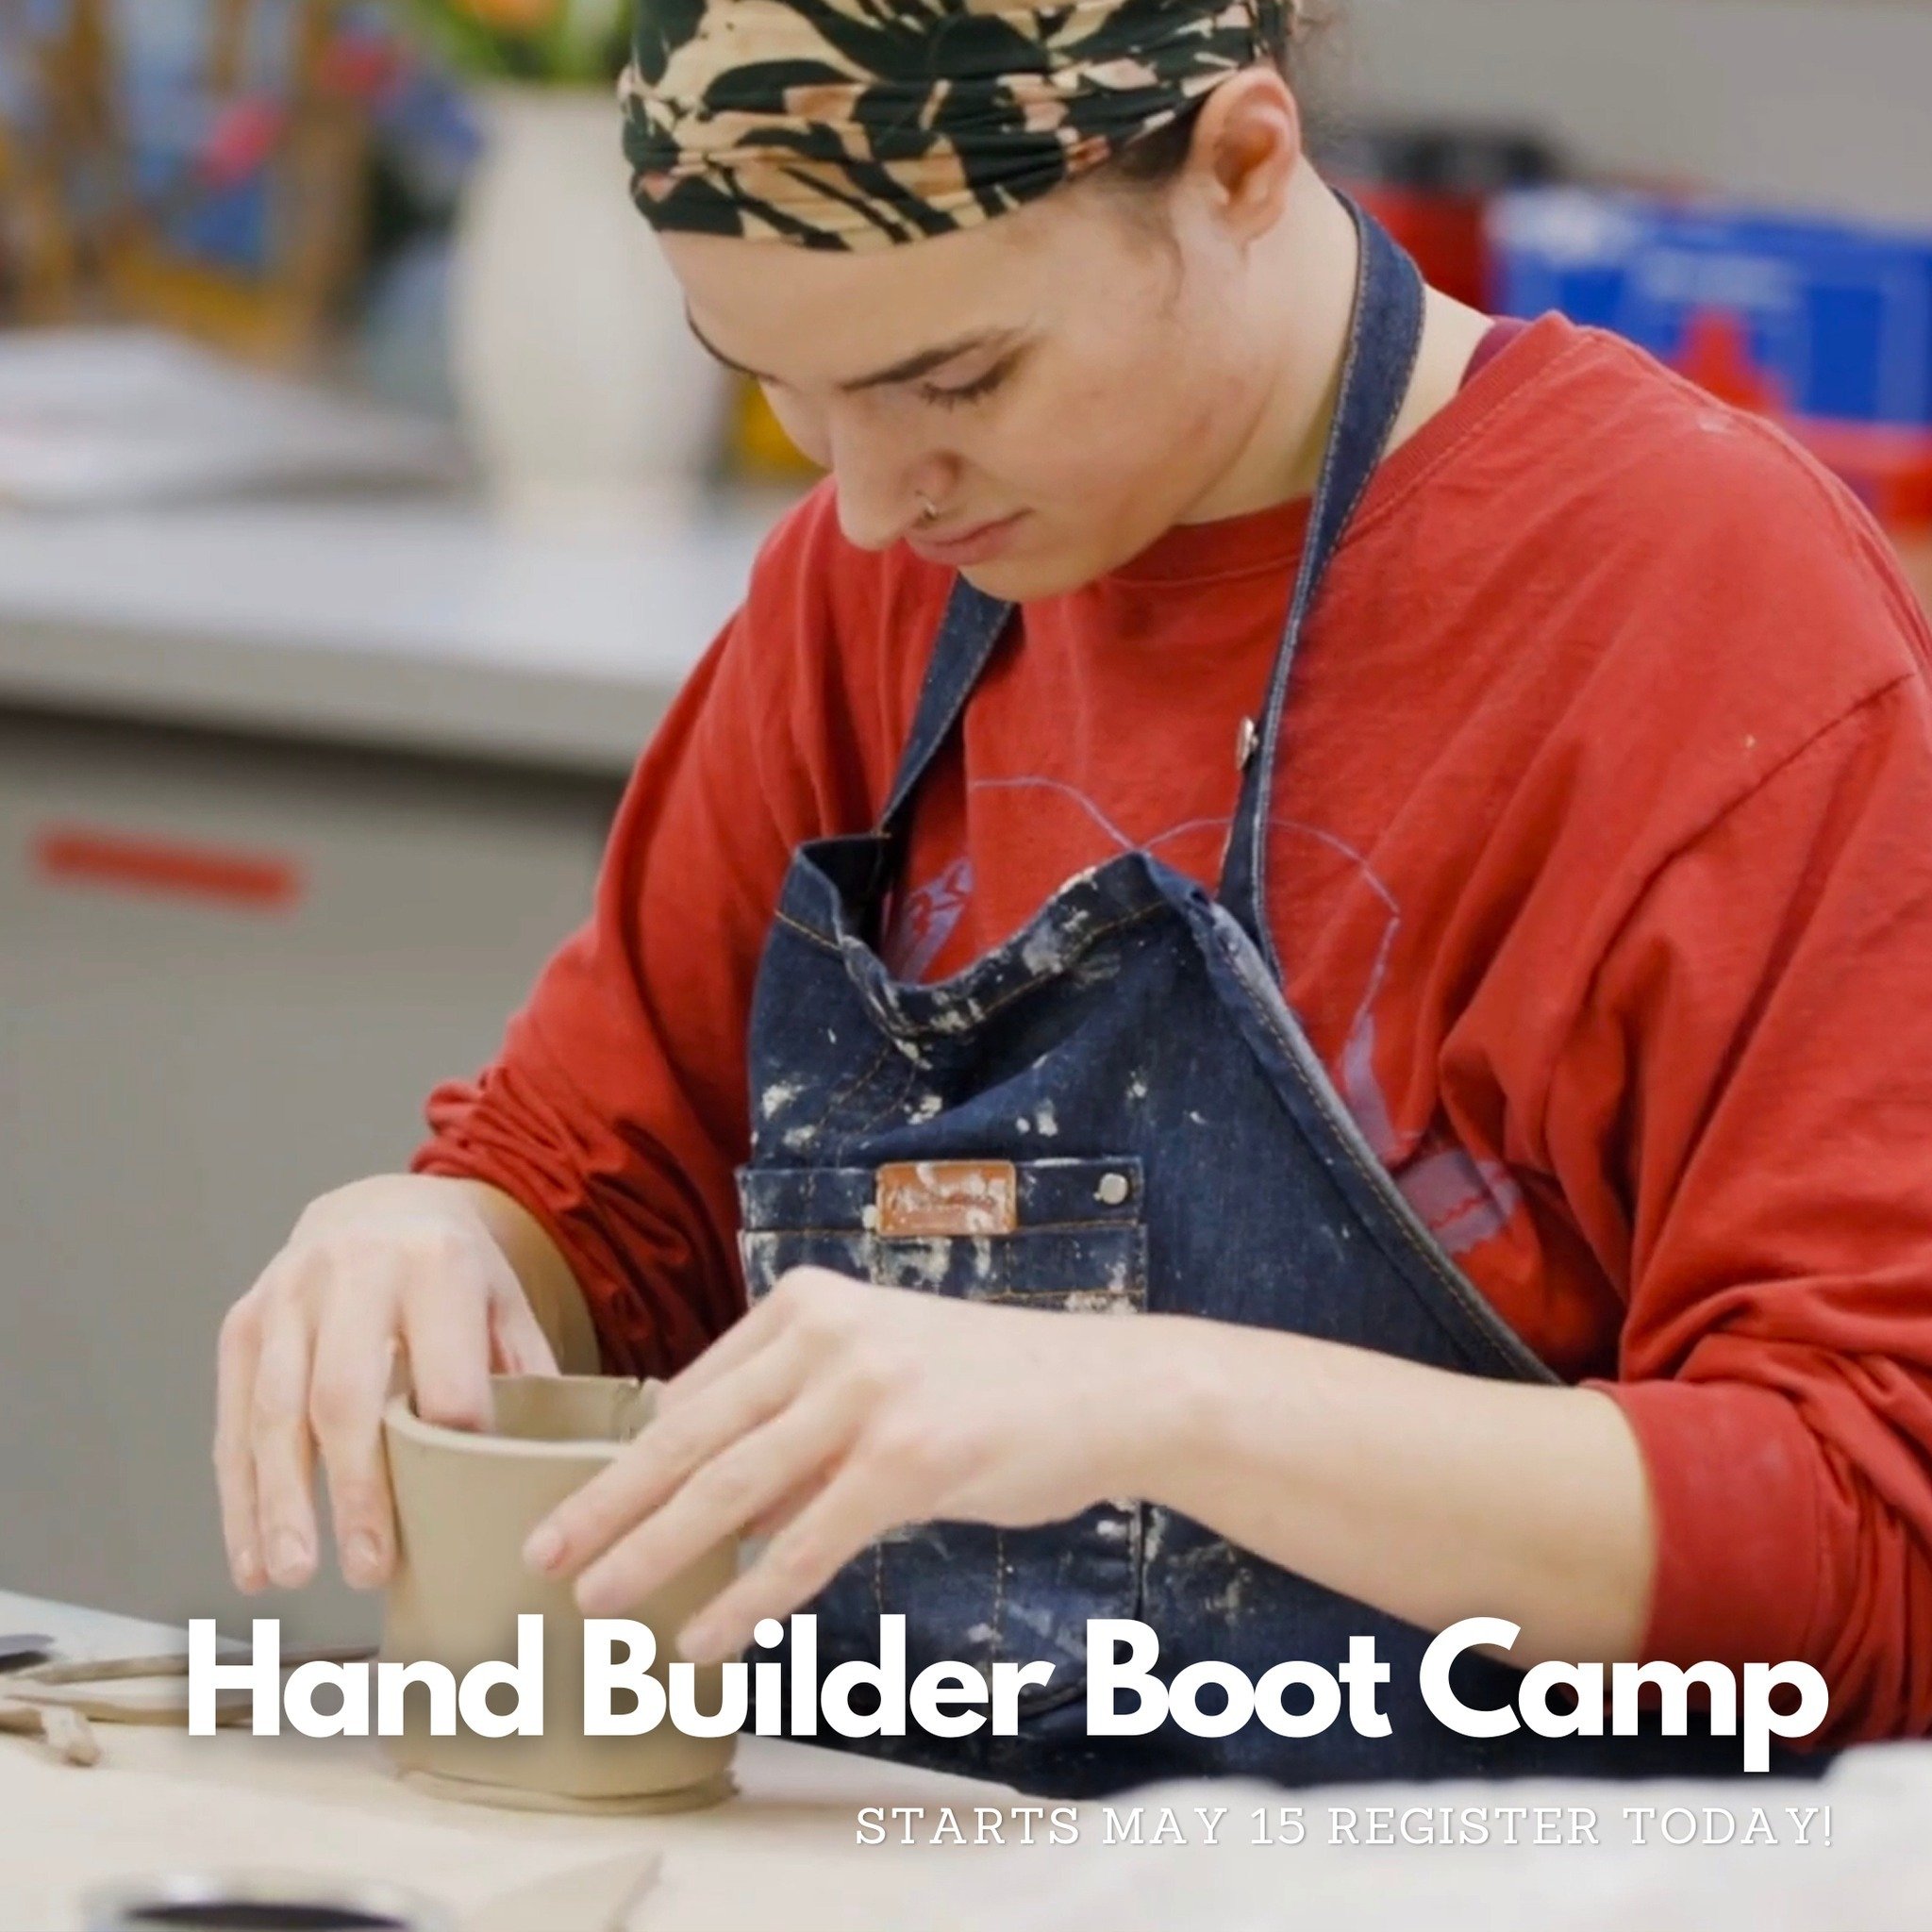 Pinch, coil, and glaze! Register today for our Hand Builder Boot Camp to learn the basics of clay, or to work on an independent project.

🔵 Hand Builder Boot Camp (18+) 3-class session / Wednesday, May 15-29 from 9 AM-12 PM

With guidance from Maure